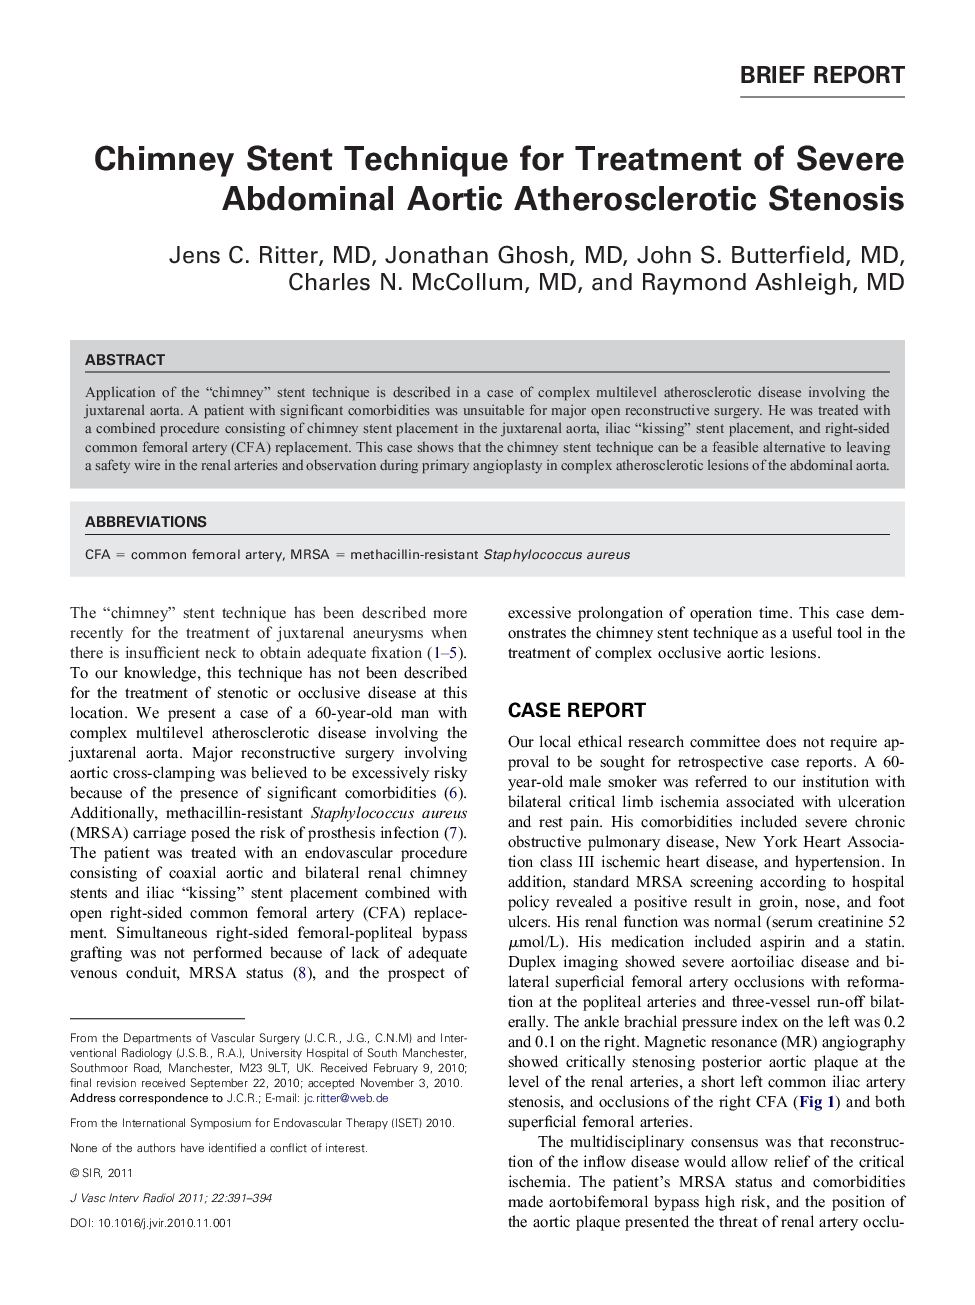 Chimney Stent Technique for Treatment of Severe Abdominal Aortic Atherosclerotic Stenosis